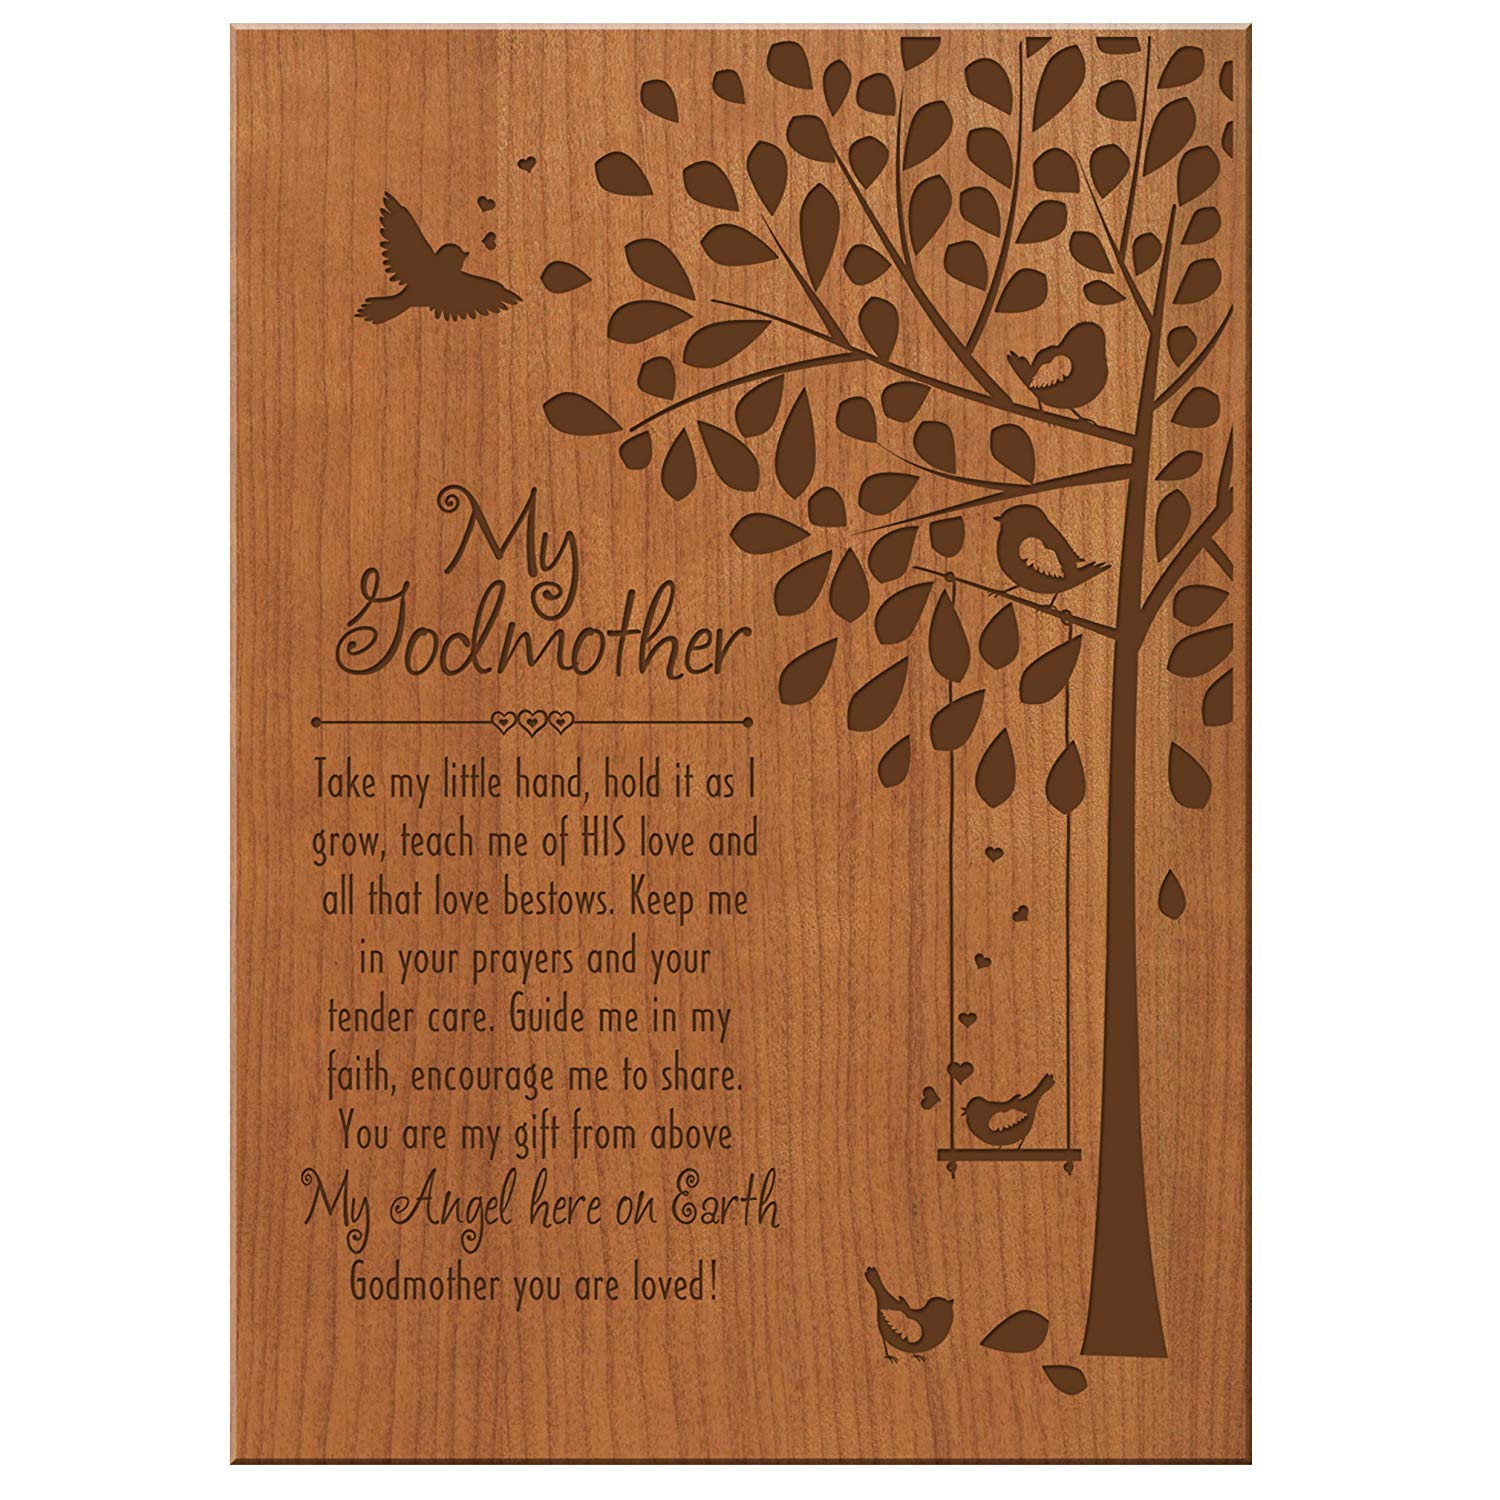 Godmother Wall Hanging Plaque Gift - Take My Little Hand - LifeSong Milestones